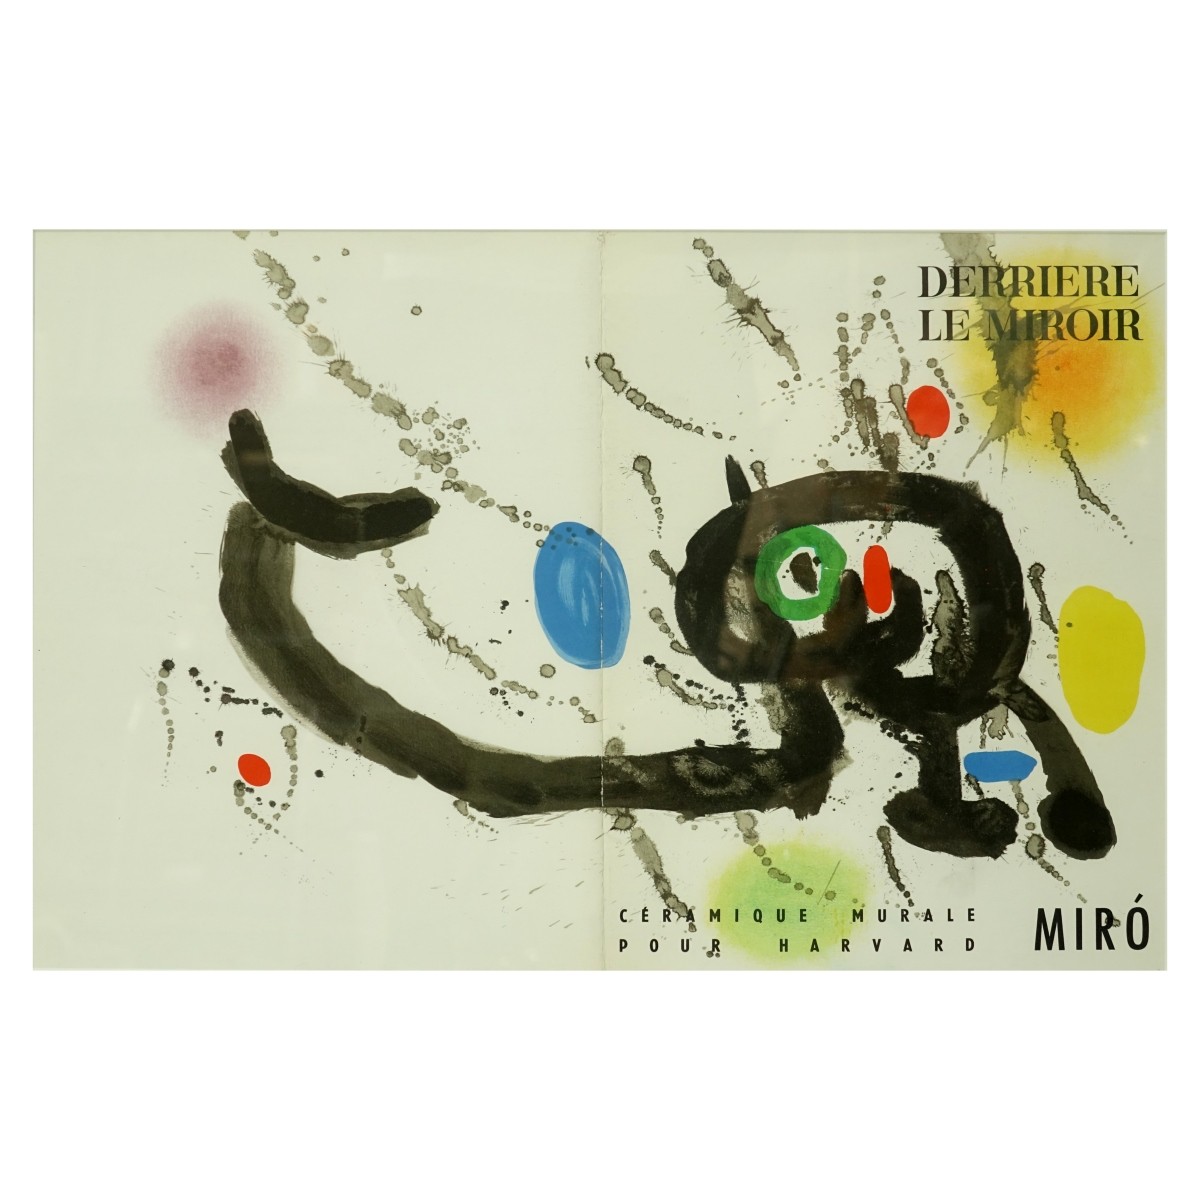 After: Joan Miro, French (1893 - 1983) Art poster